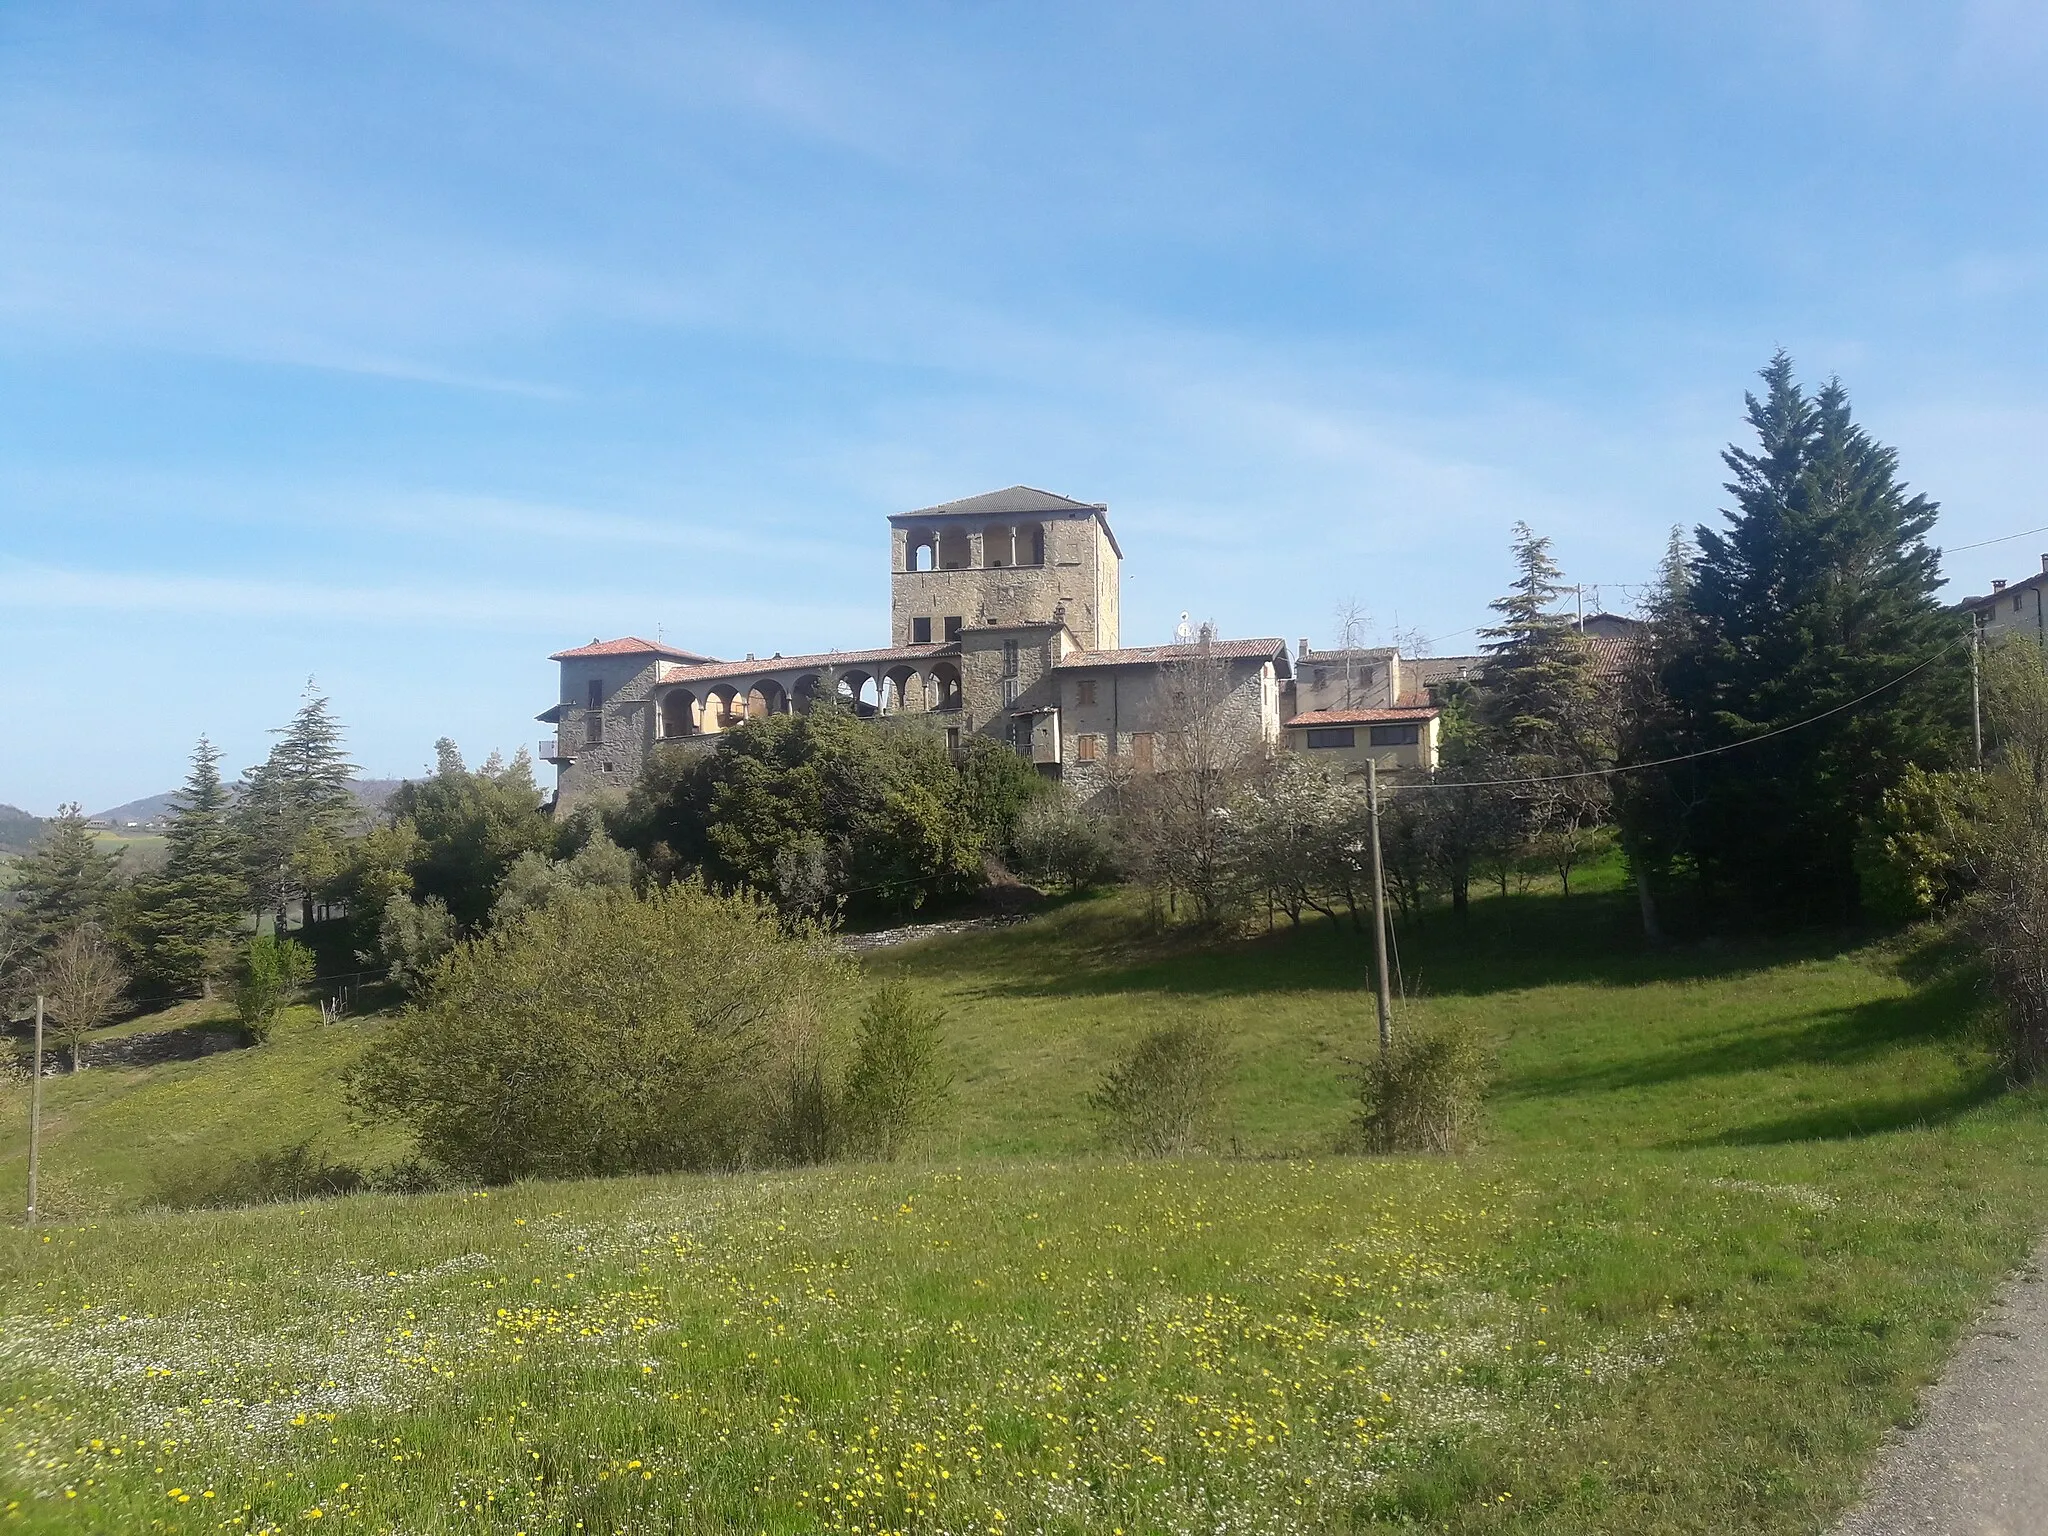 Photo showing: The castle of Caminata, located in Bramaiano, municipality of Bettola, Piacenza, Italy